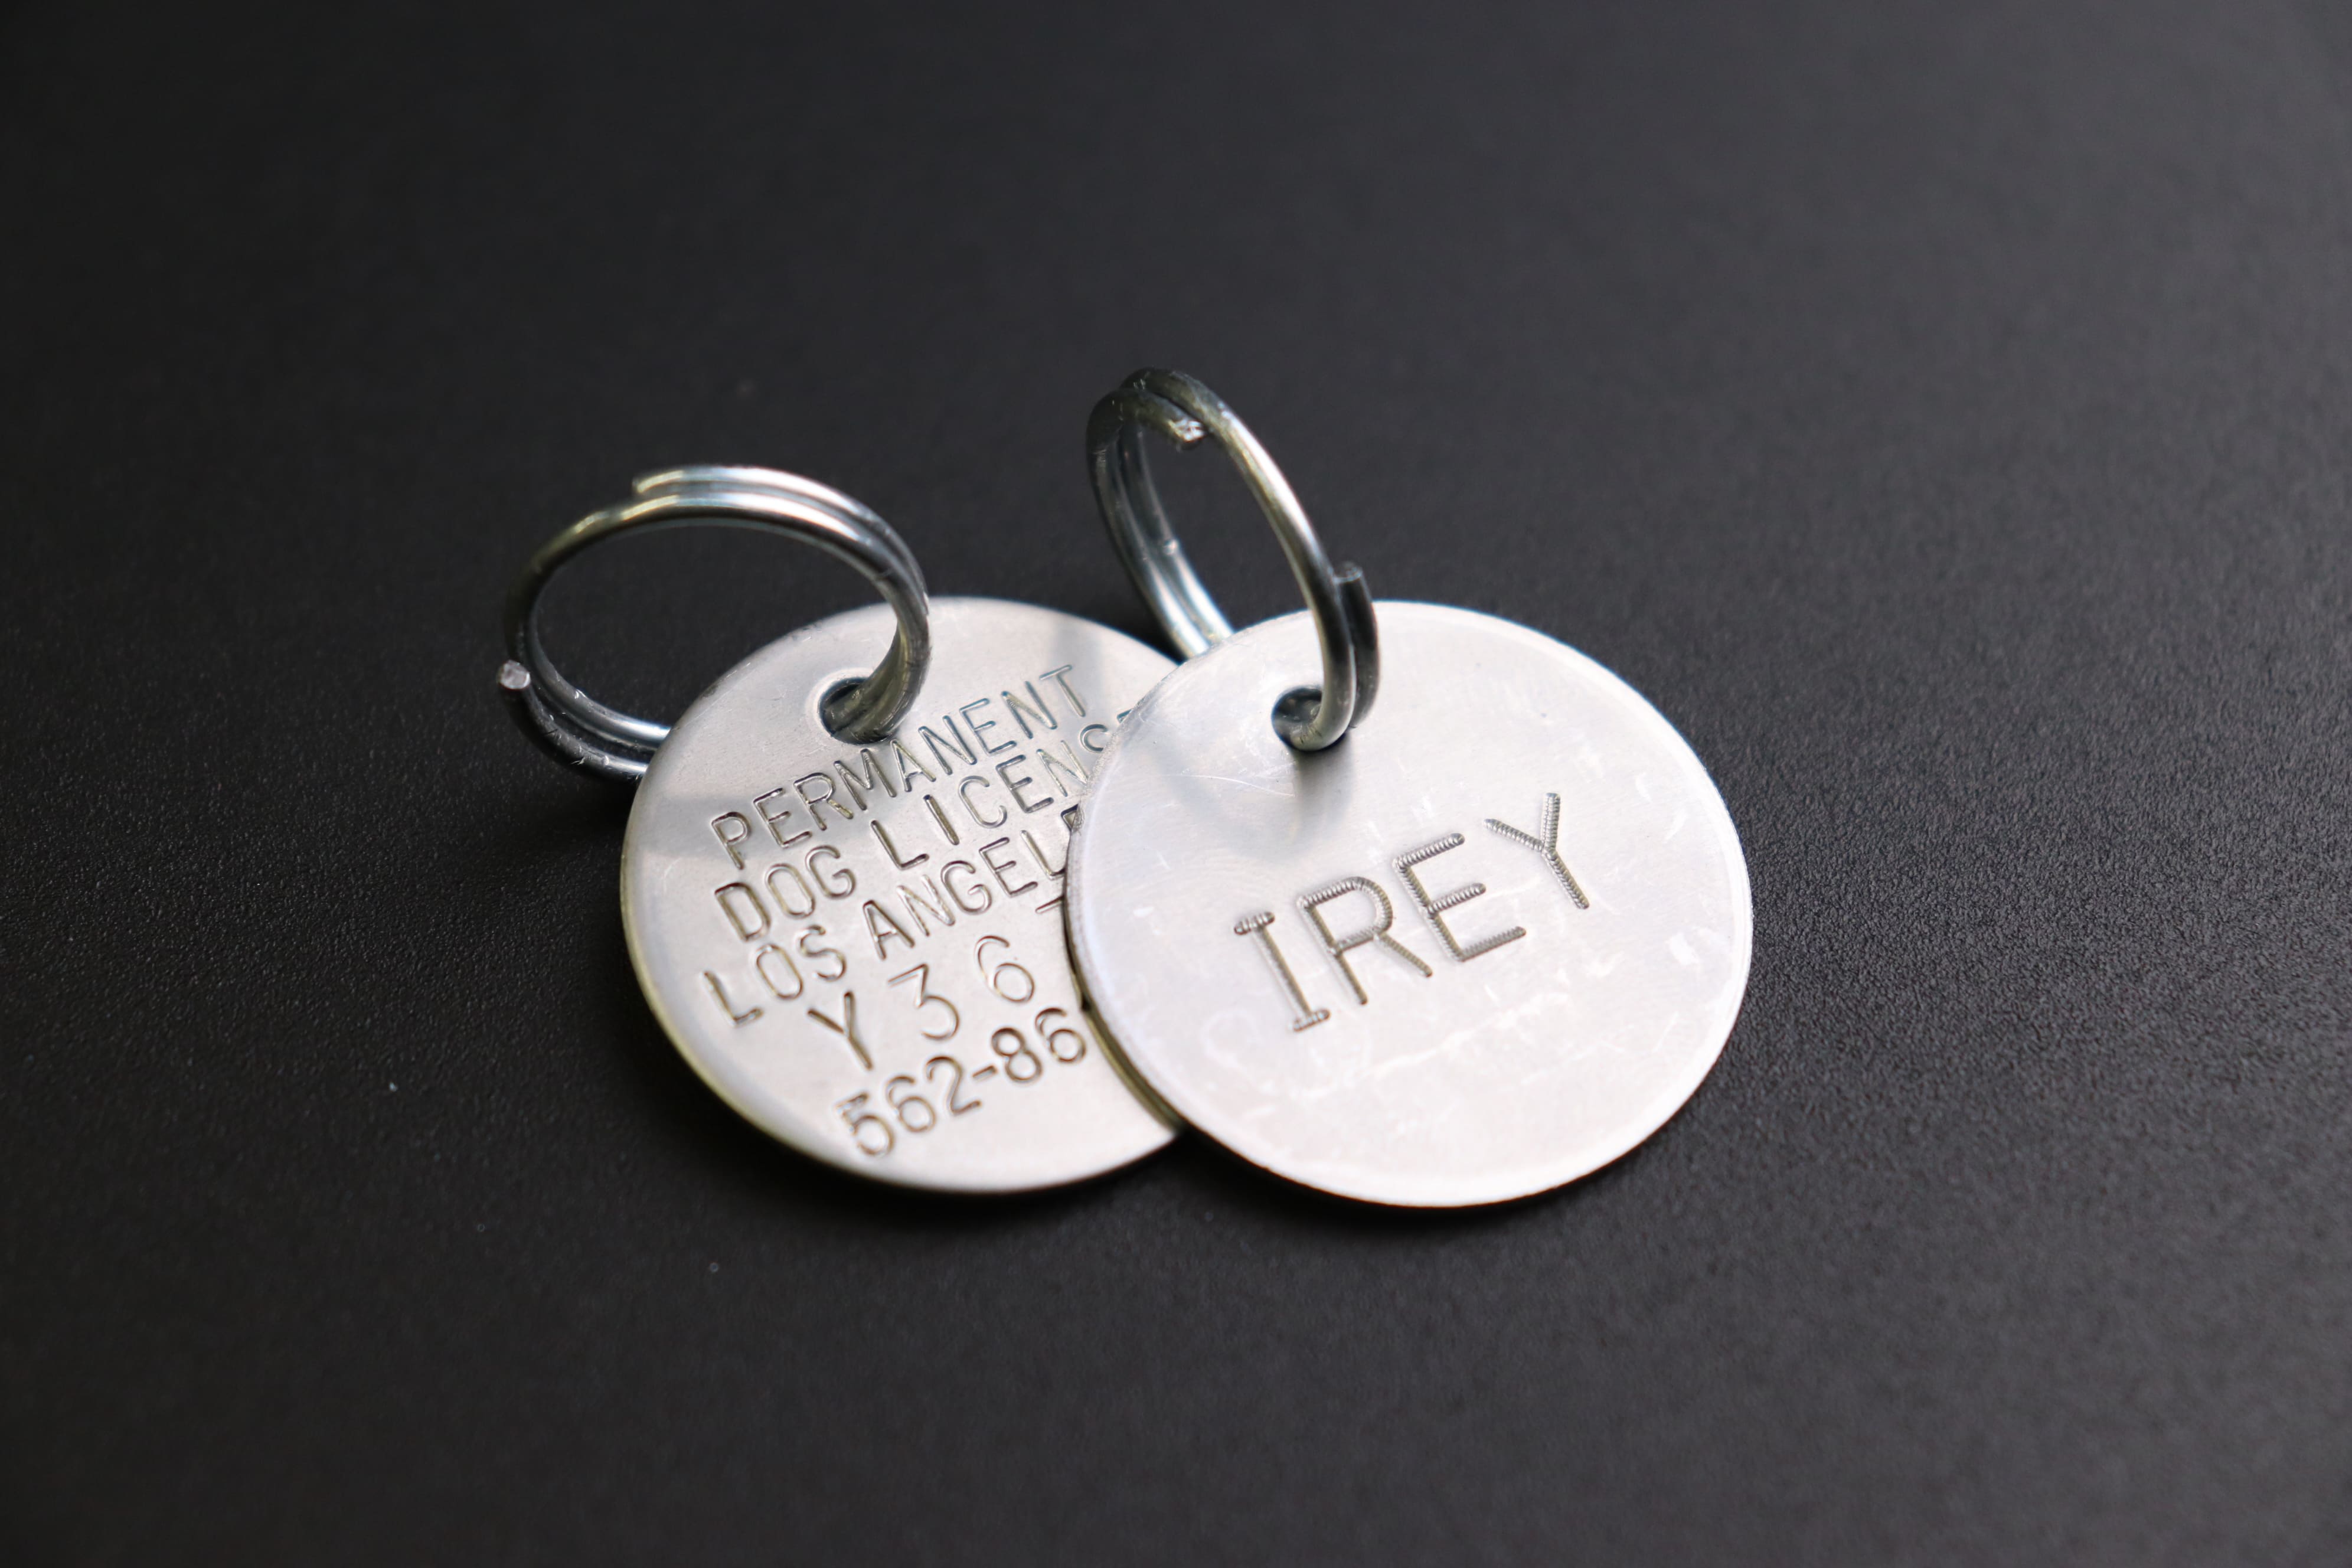 Image of two thin, round dog tags engraved with text and numbers 'IREY' for one and 'PERMANENT DOG LICENSE LOS ANGELS Y36 562-86' for the other.